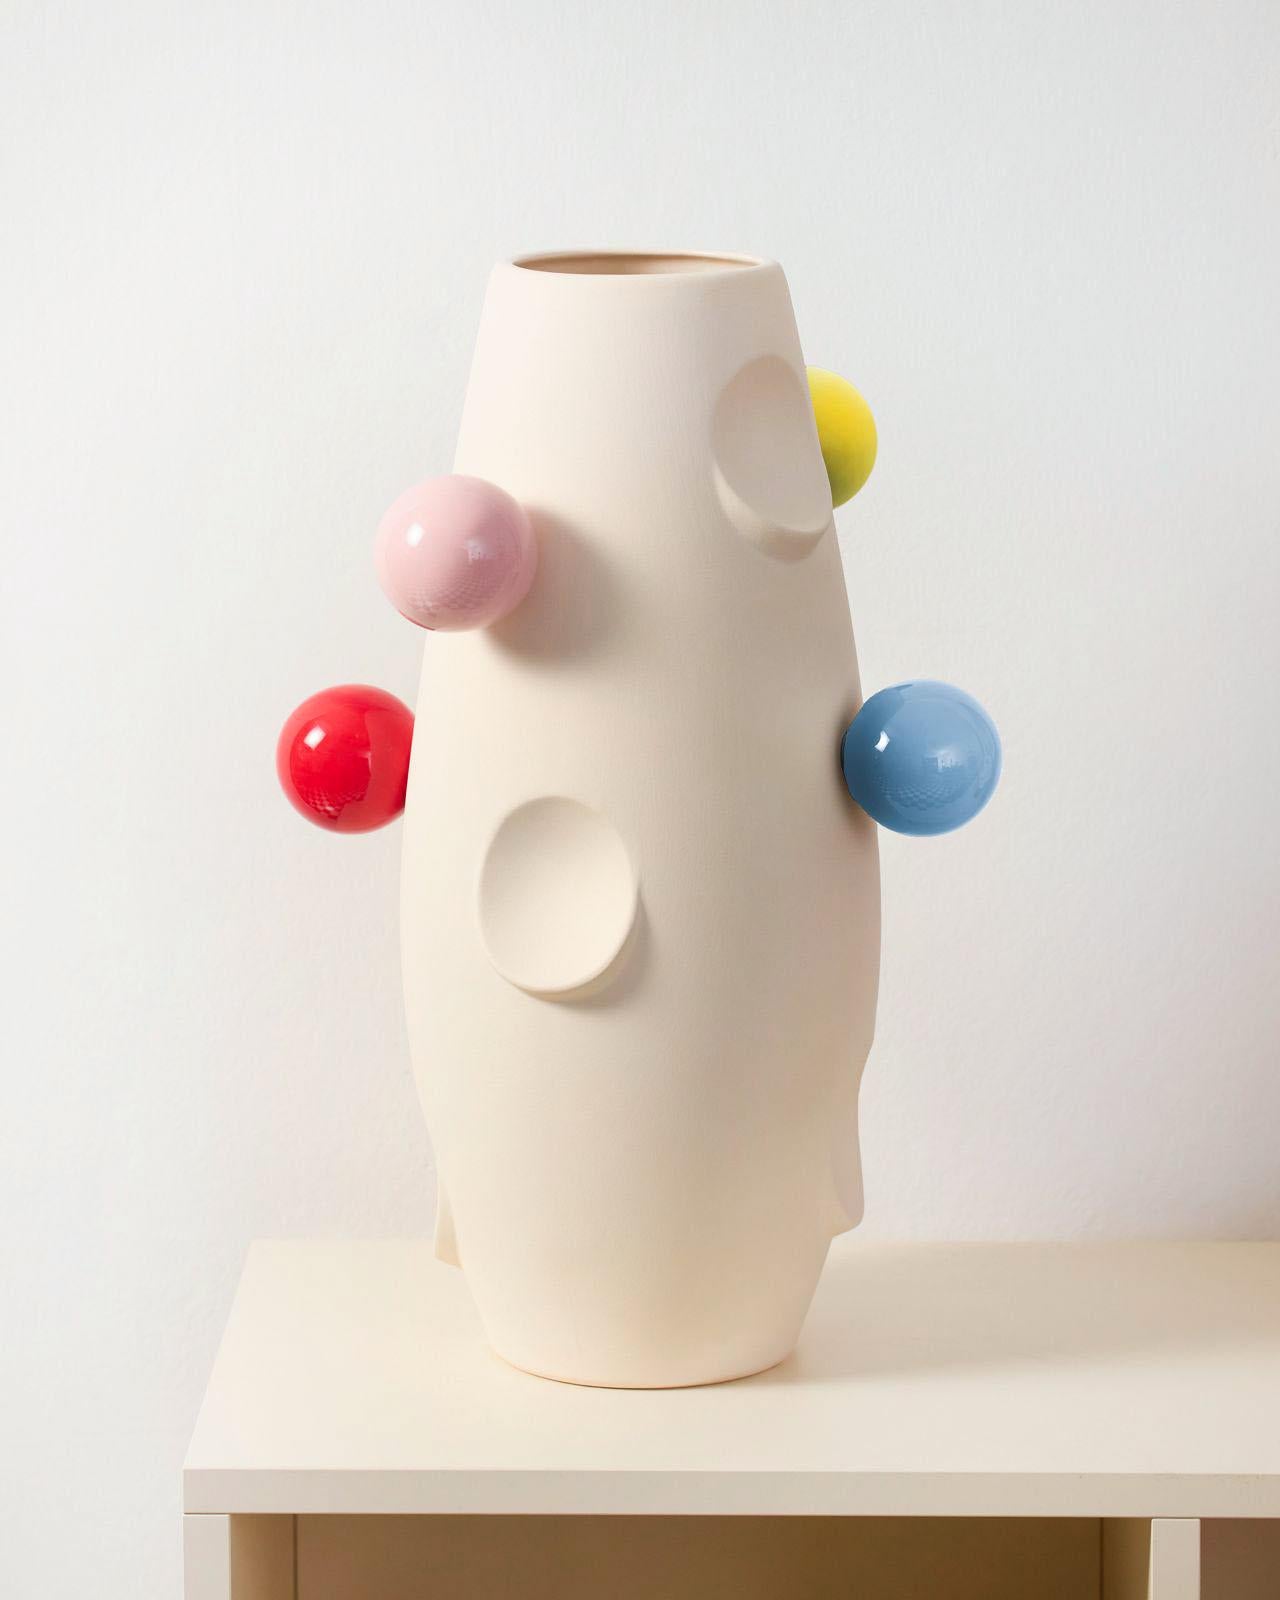 OKO Big Cyrk is a variation on the earlier OKO Cyrk vase. The balls placed on the classic OKO vase in the BIG edition have been enlarged and incorporated into the round surface of the vase.

The vase's height is 42 cm, and its diameter is 19 cm. It